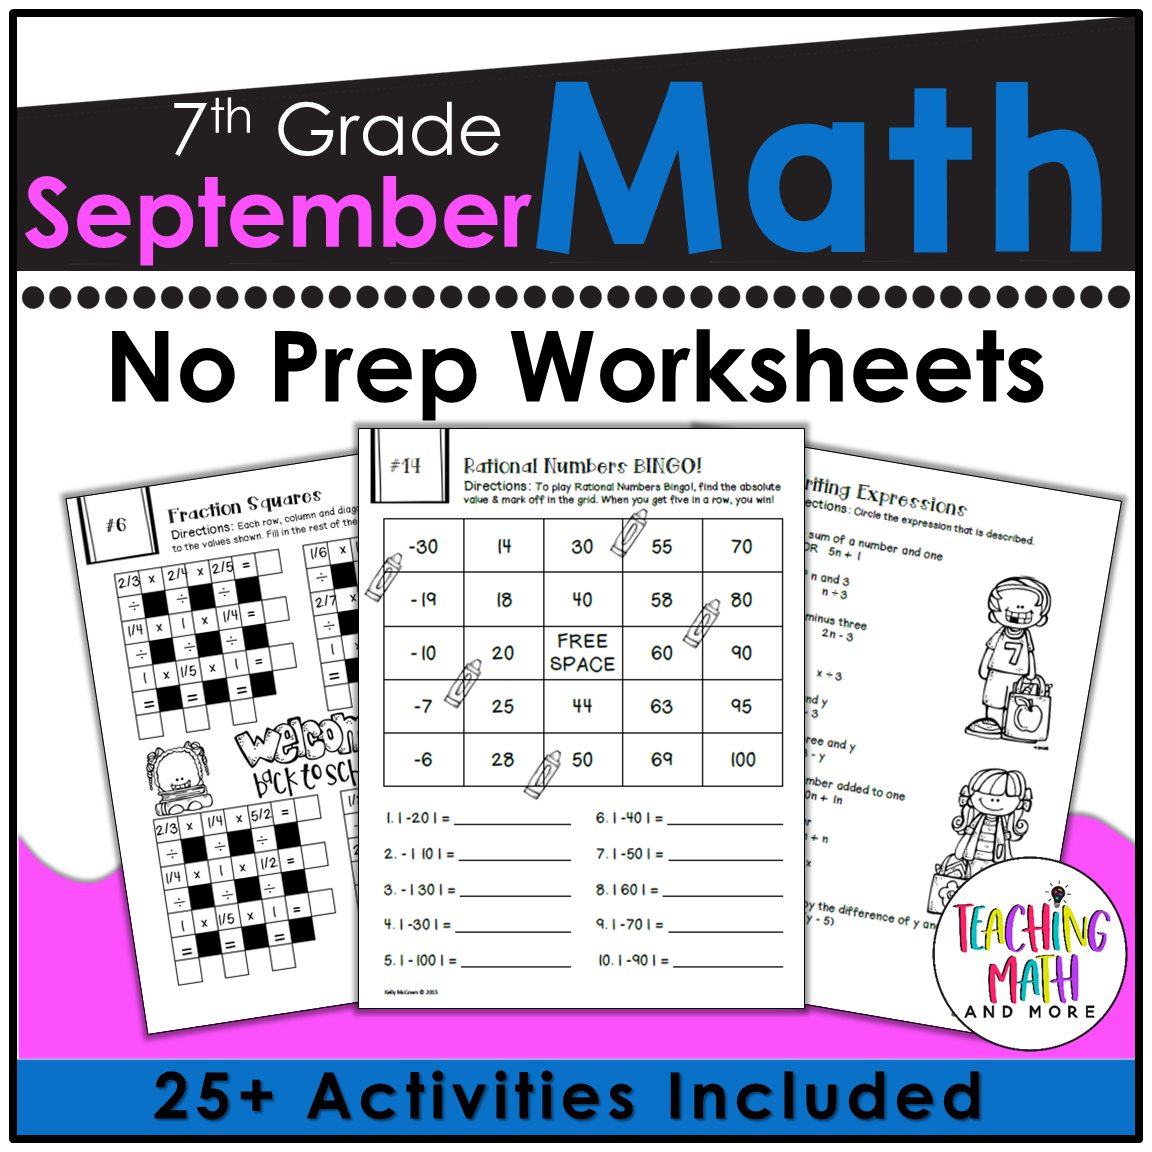 back-to-school-math-activities-7th-grade-teaching-math-and-more